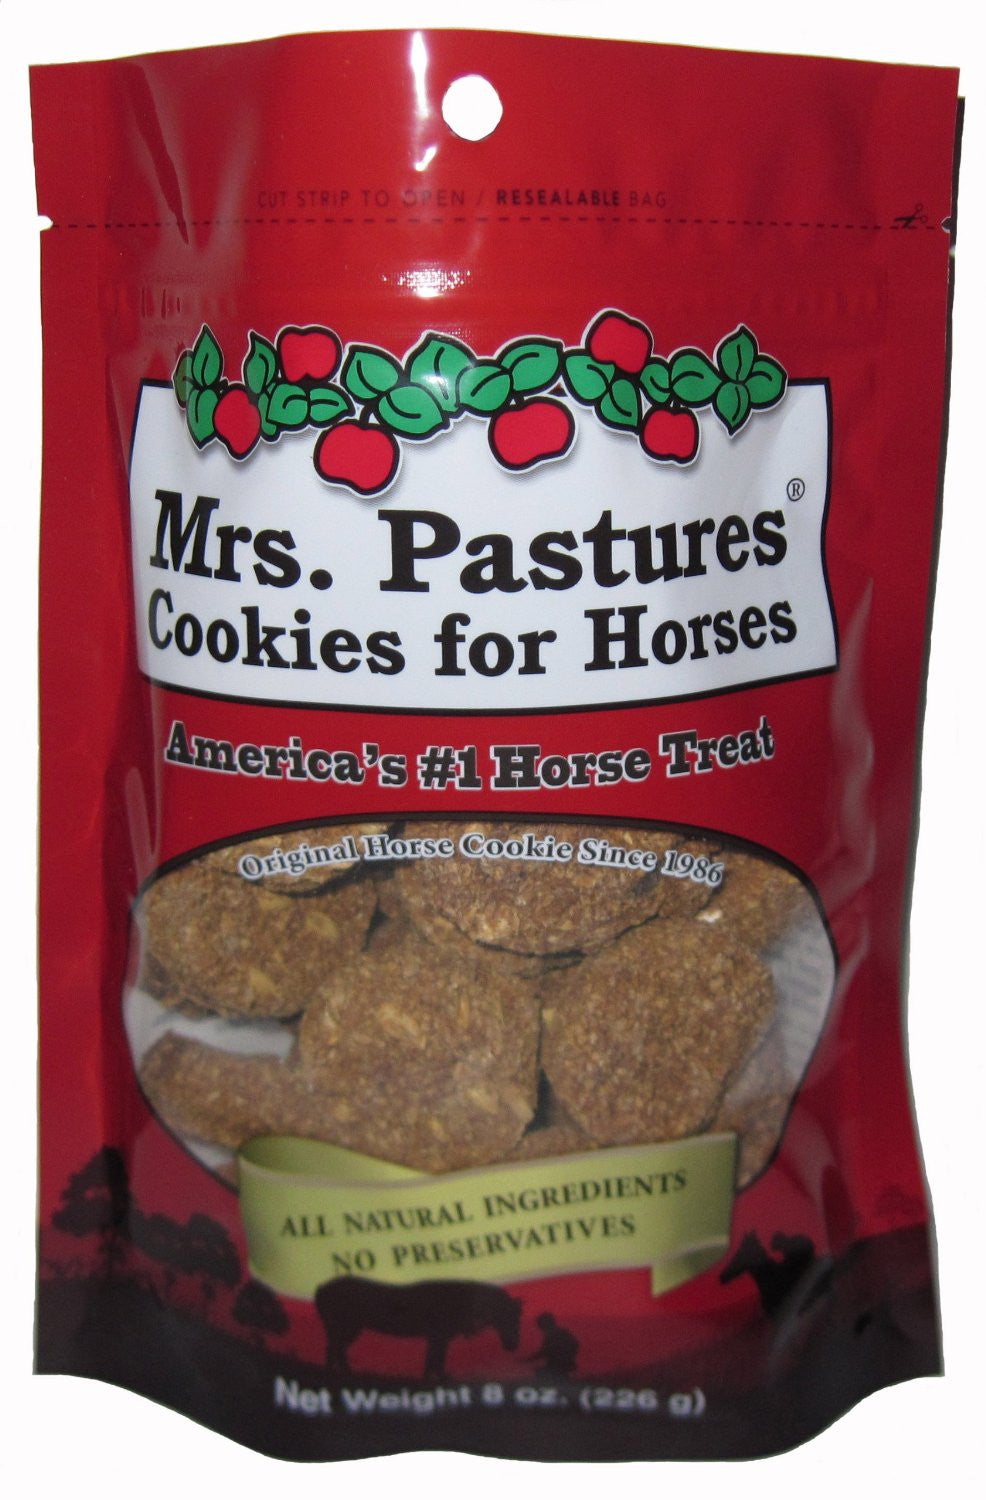 Mrs. Pastures Cookies for Horses - The Tack Shop of Lexington